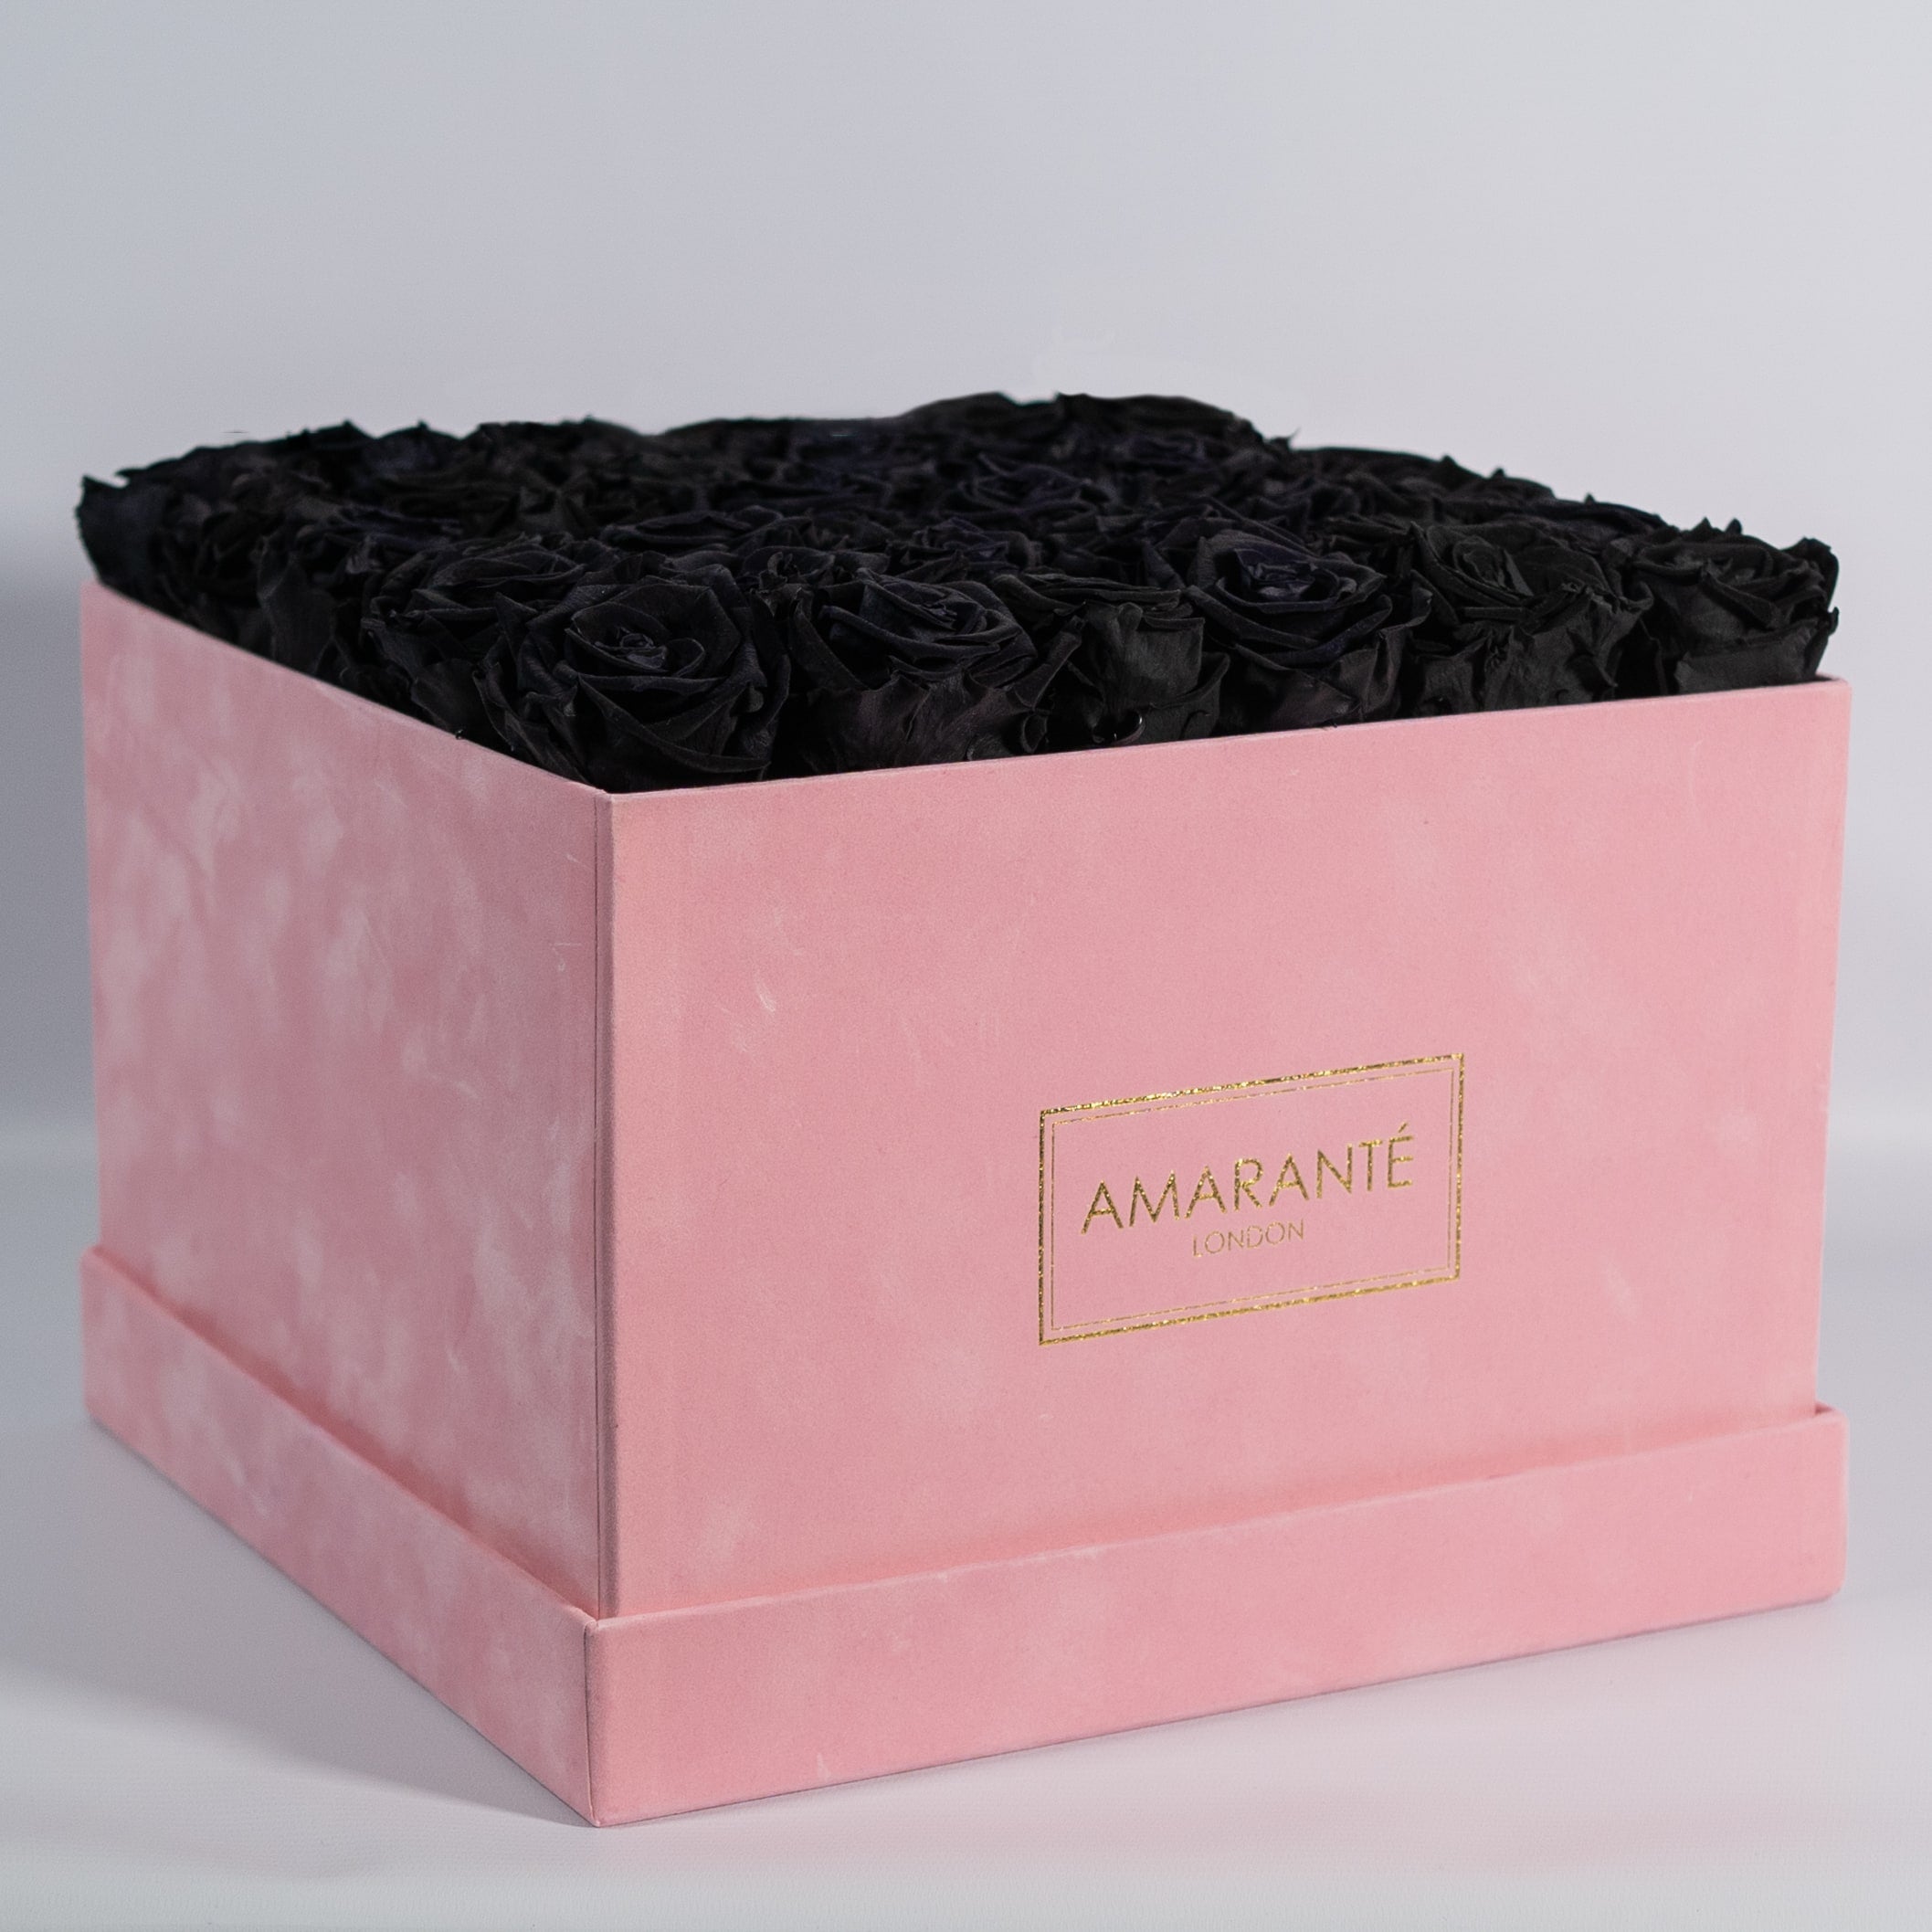 Bold black roses featured in a sophisticated pink box  